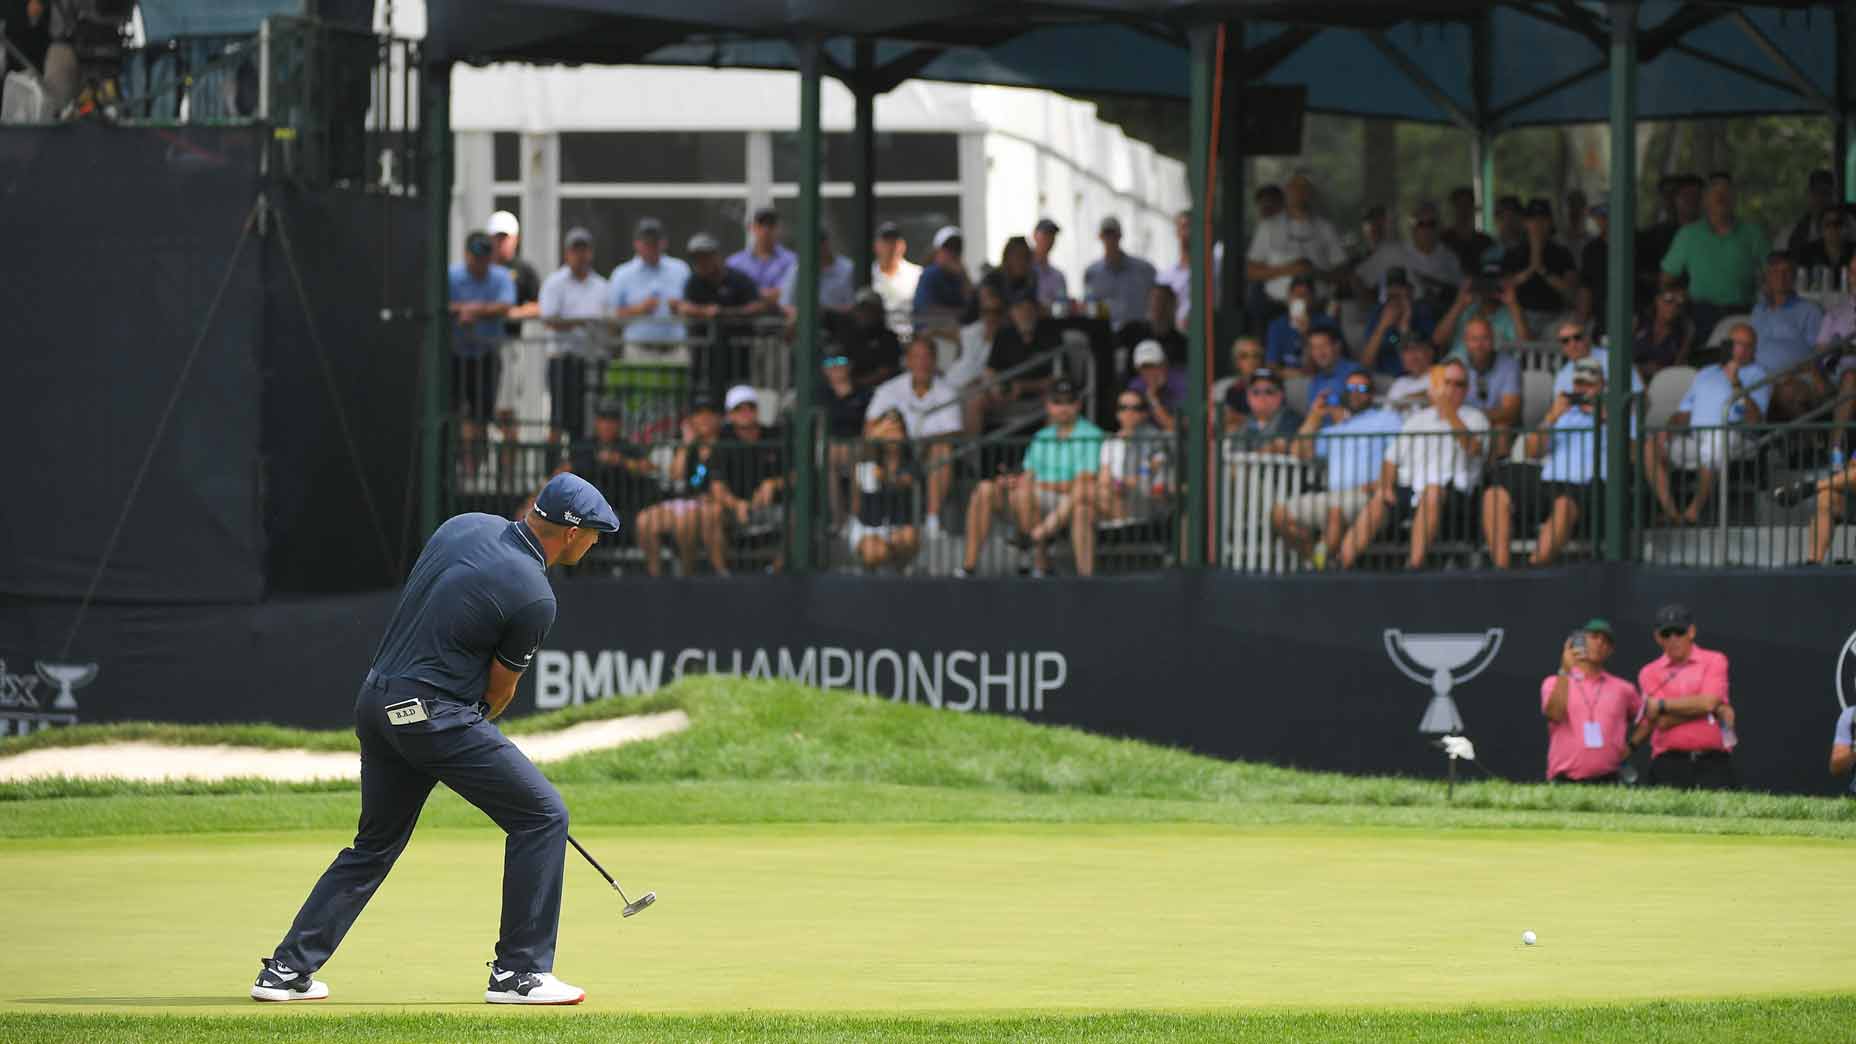 2021 Bmw Championship Live Coverage How To Watch Round 3 Saturday